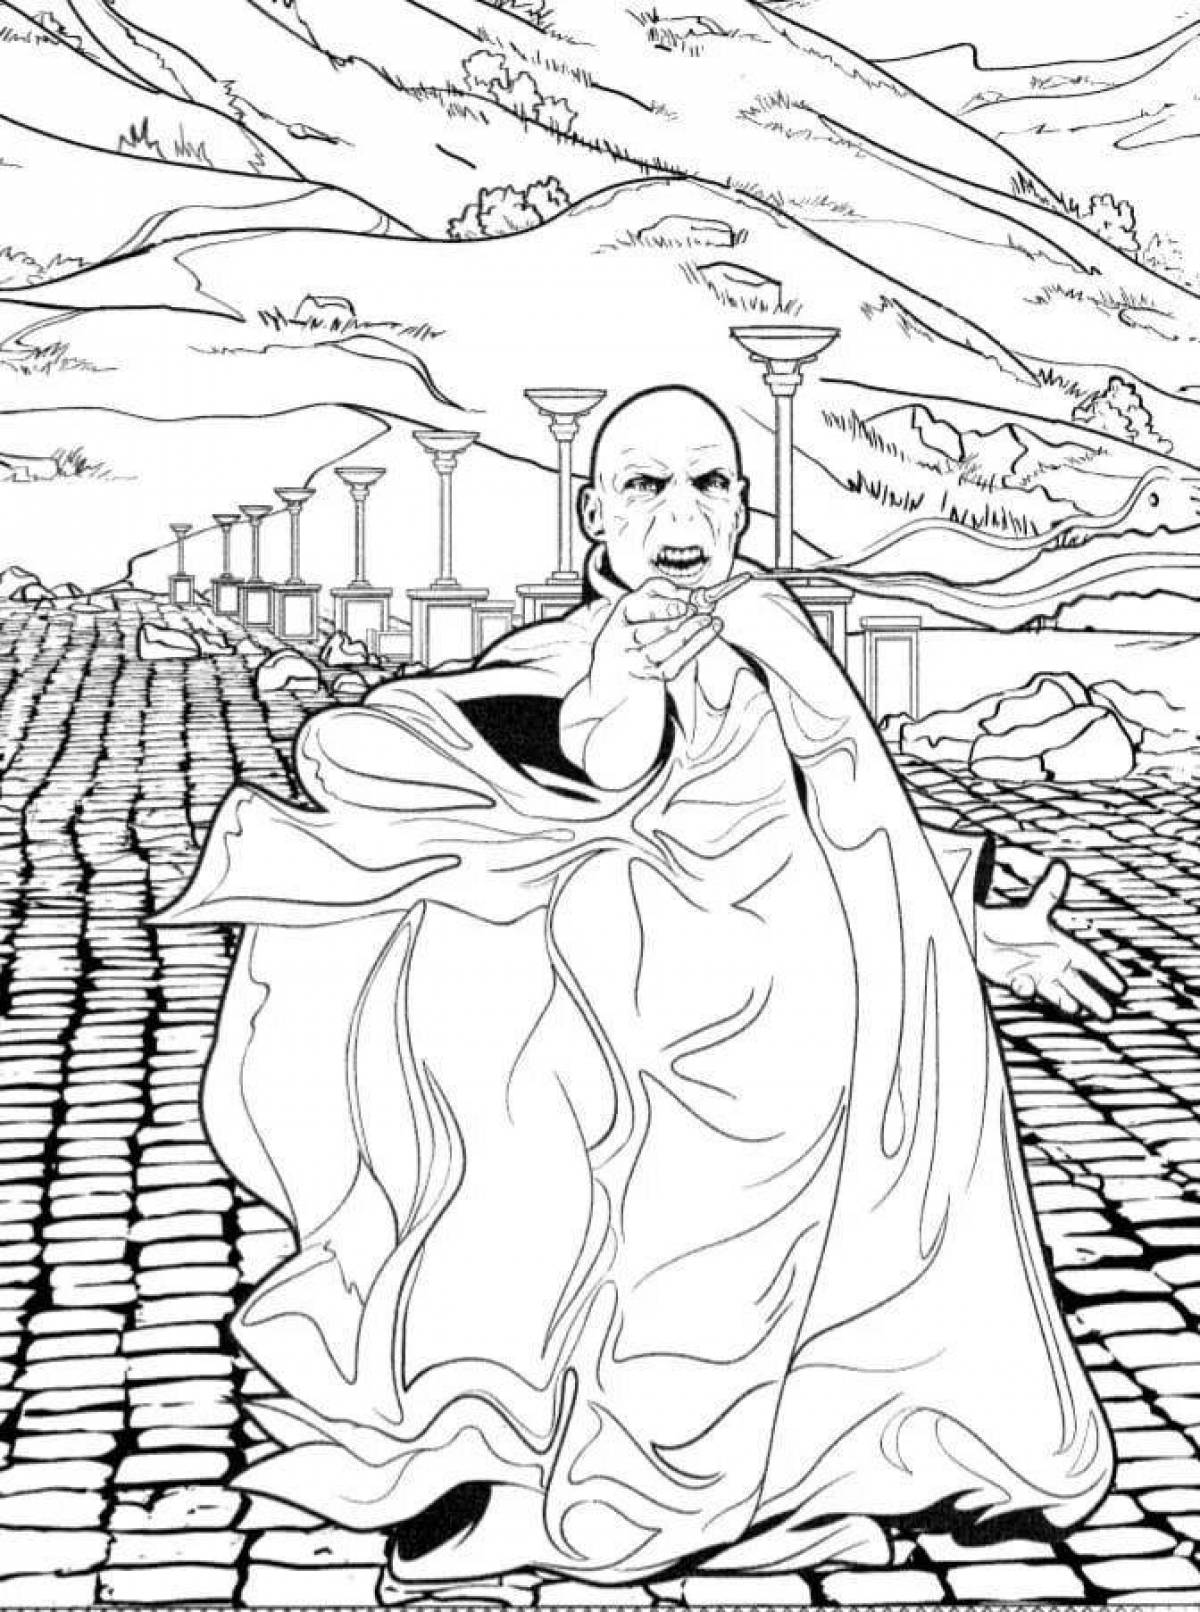 Awesome voldemort coloring book